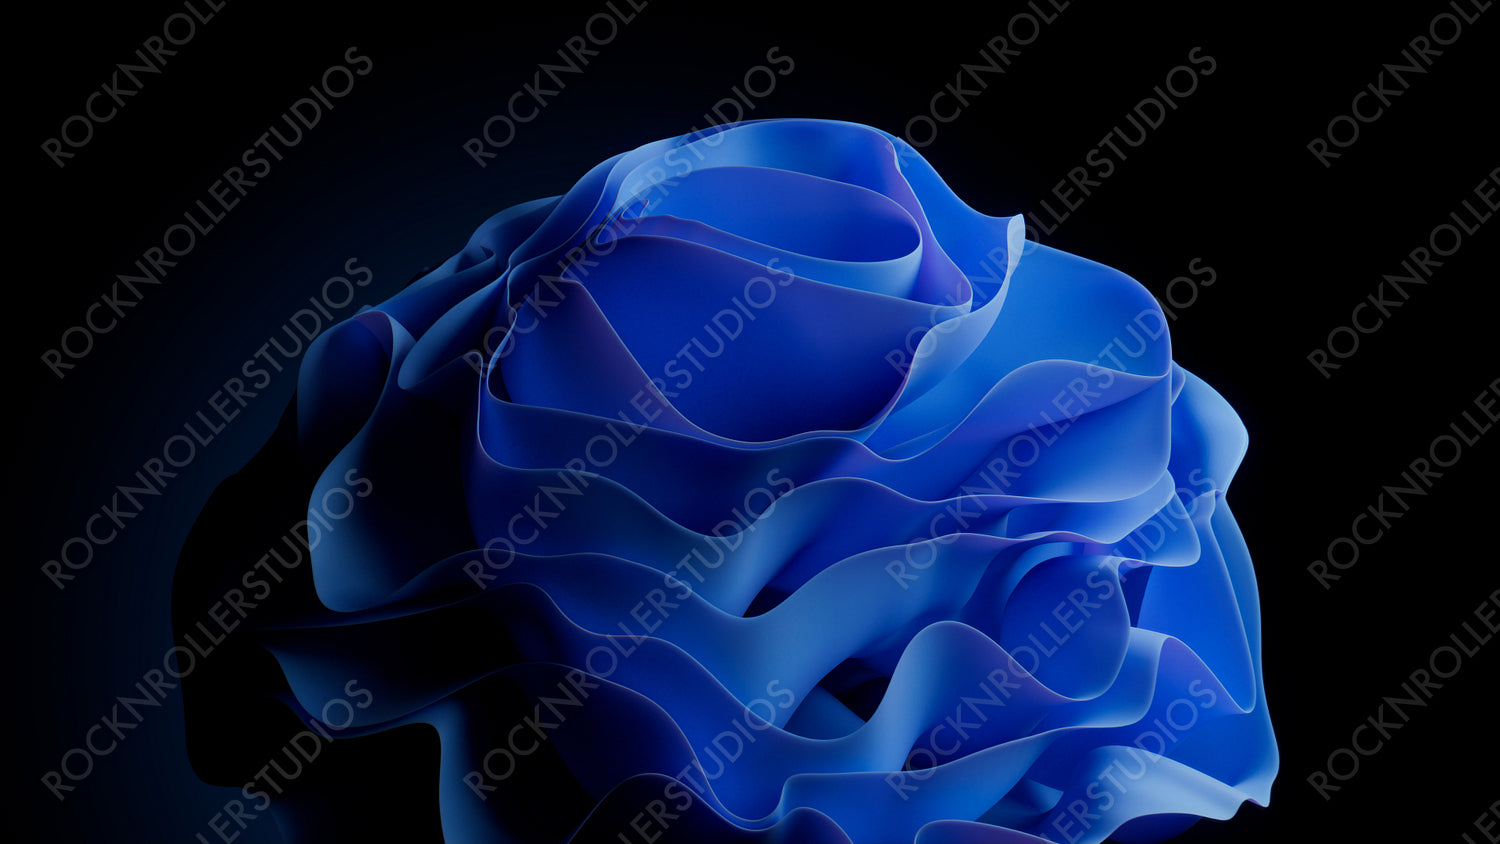 Trendy Flower Design Background, with Wavy, Abstract Blue Surfaces. 3D Render.